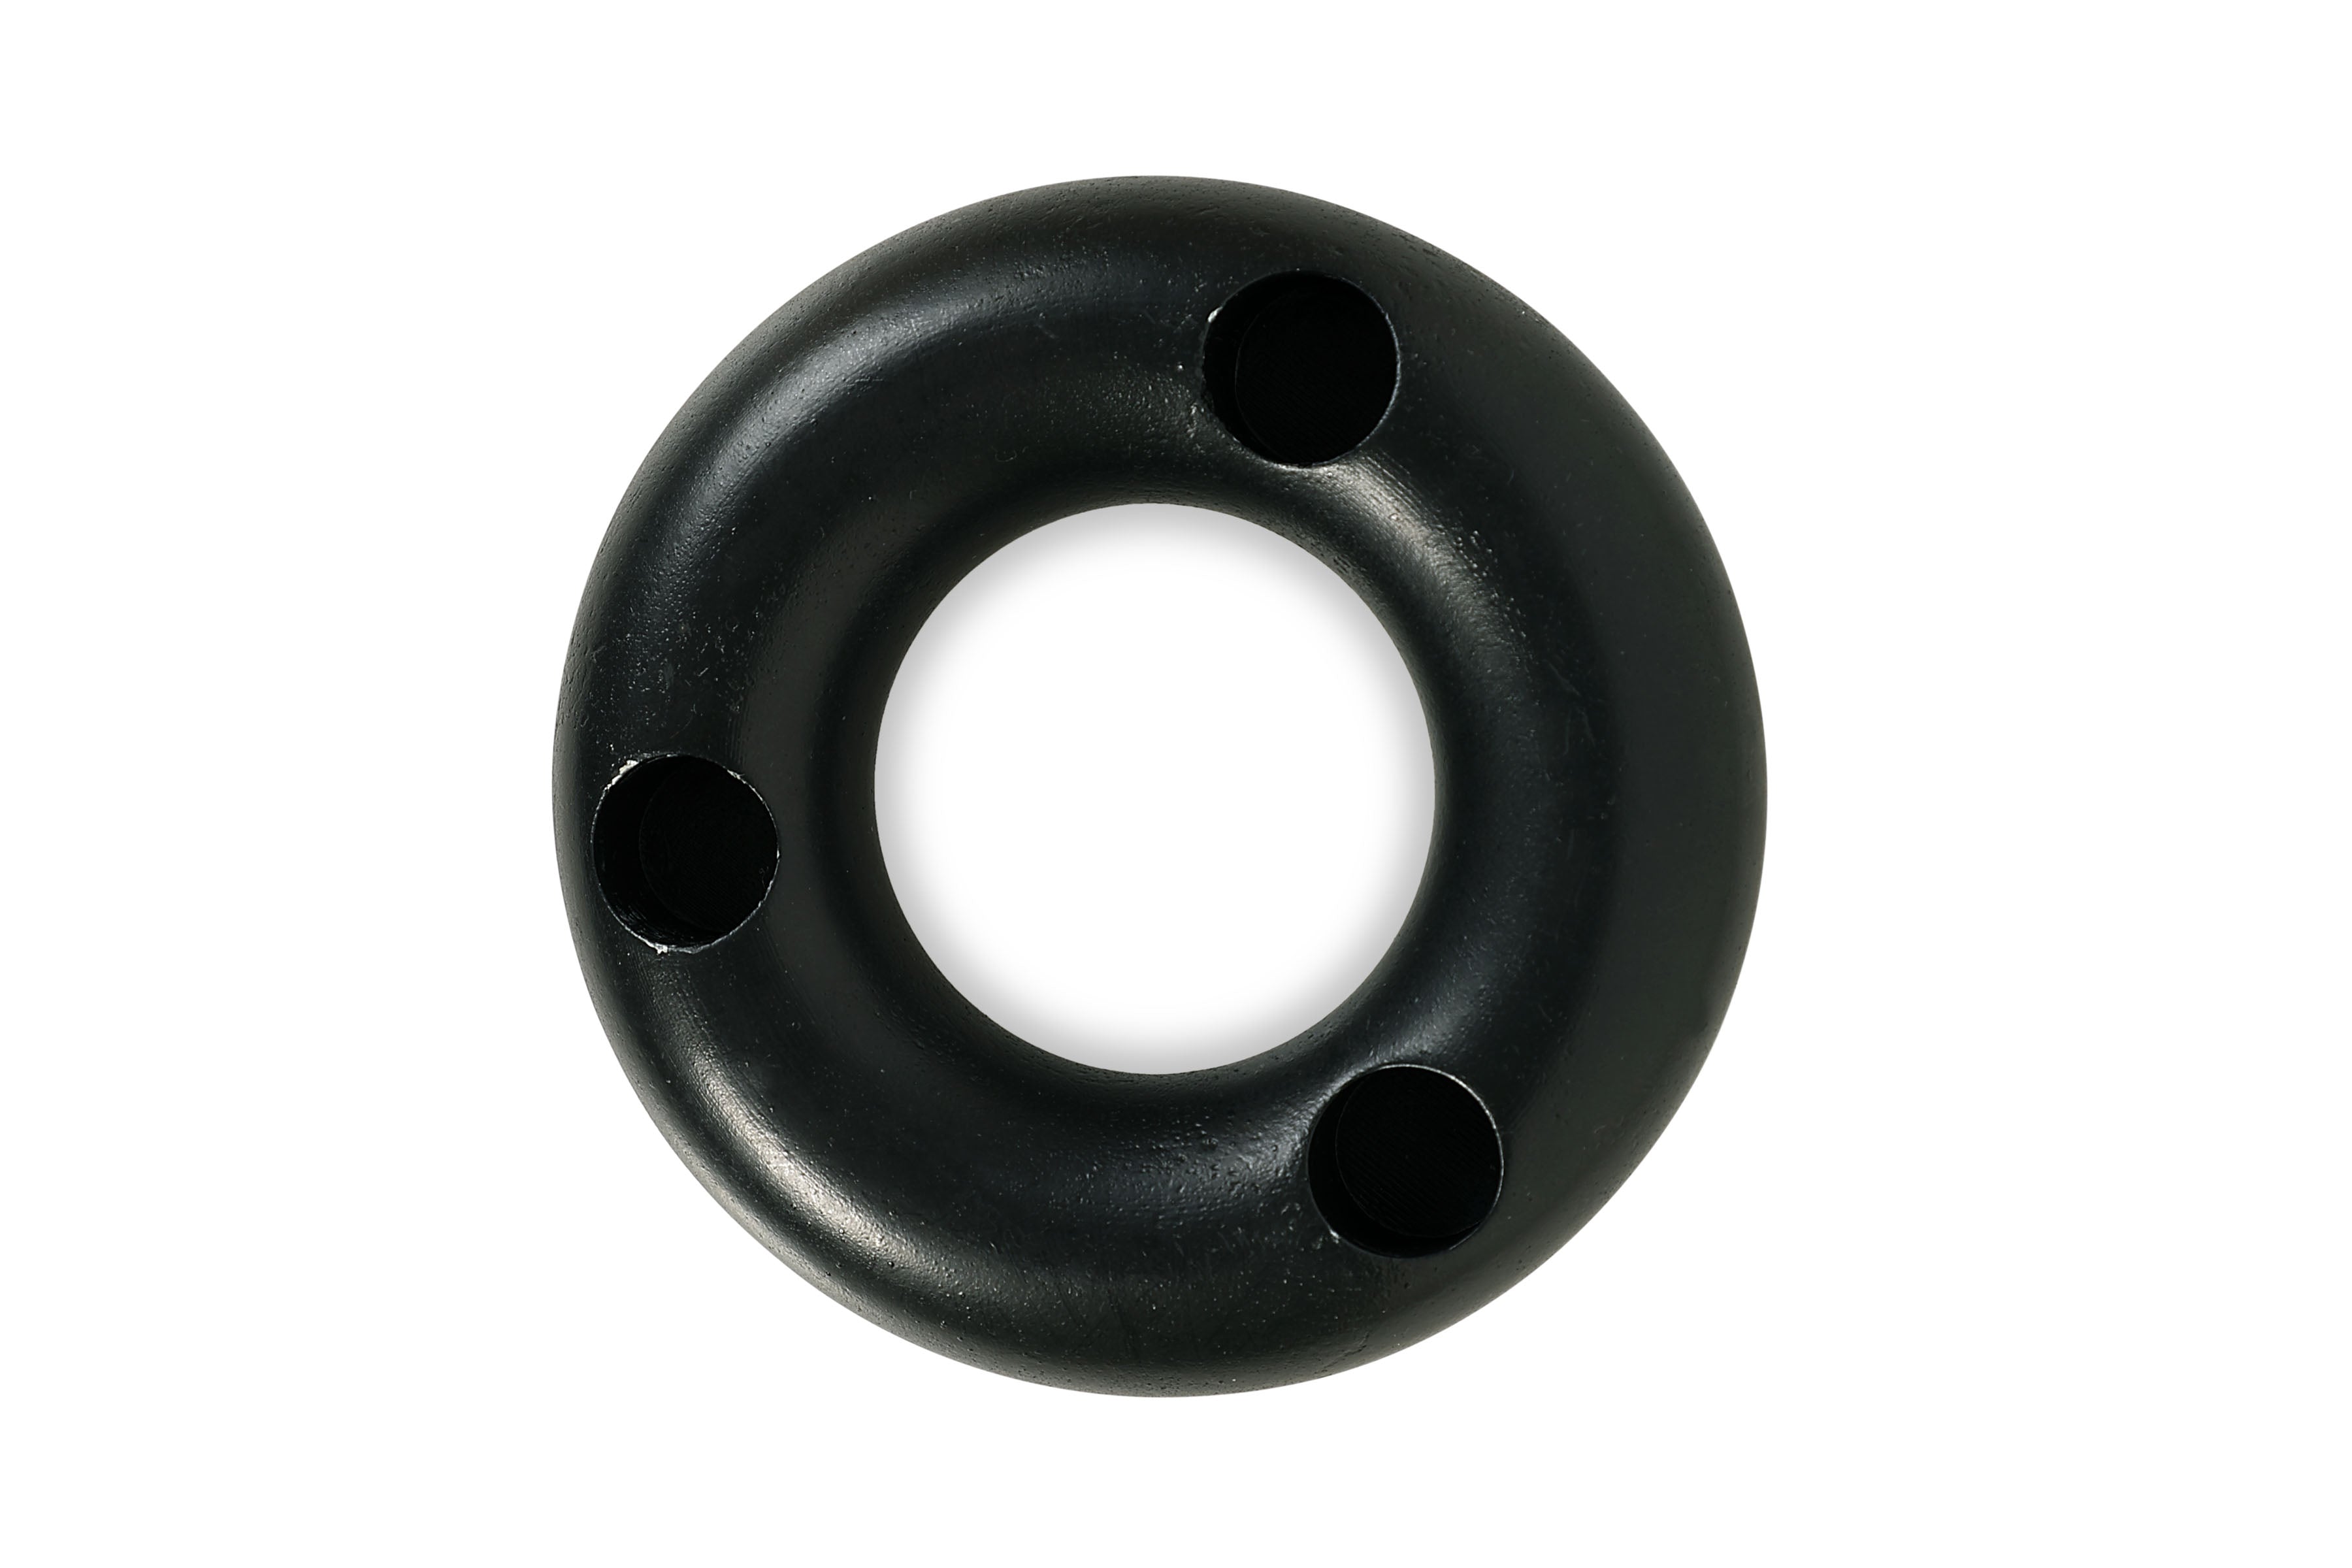 Nordic Donut Style Concrete Candle Holder - Black (Set of 2)